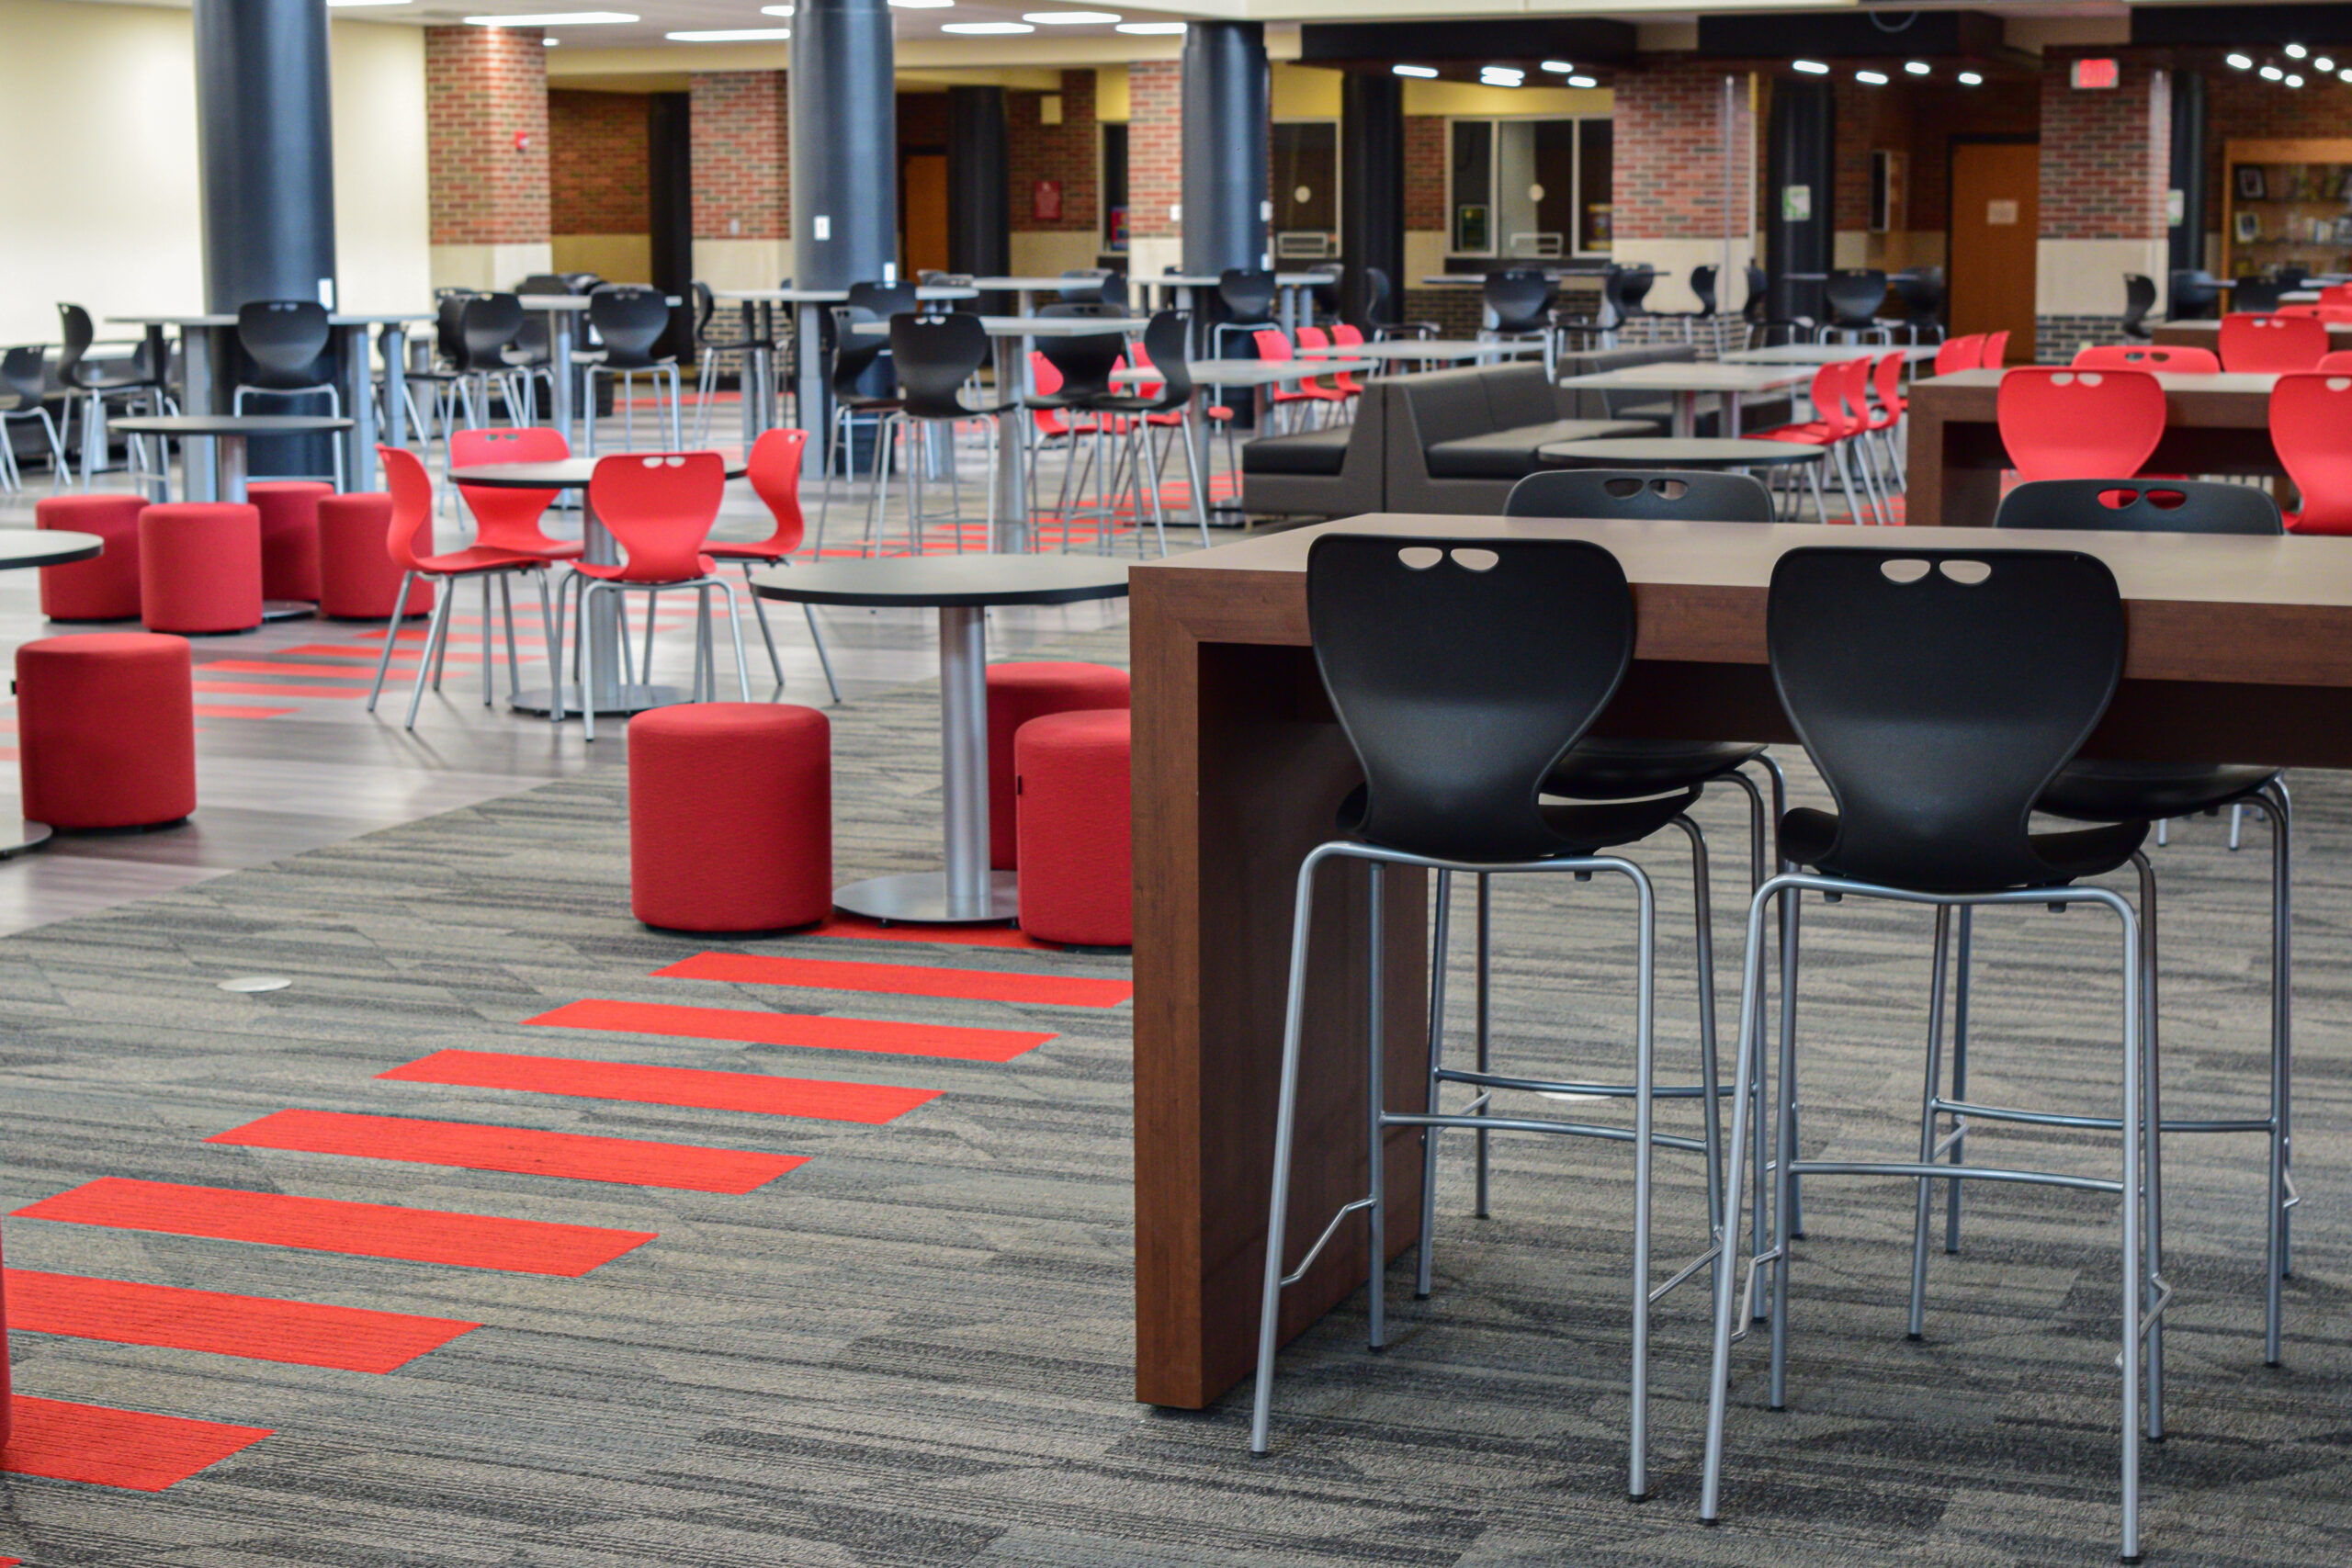 New Albany High School Uses Creative Multipurpose Room Design to Maximize its Space